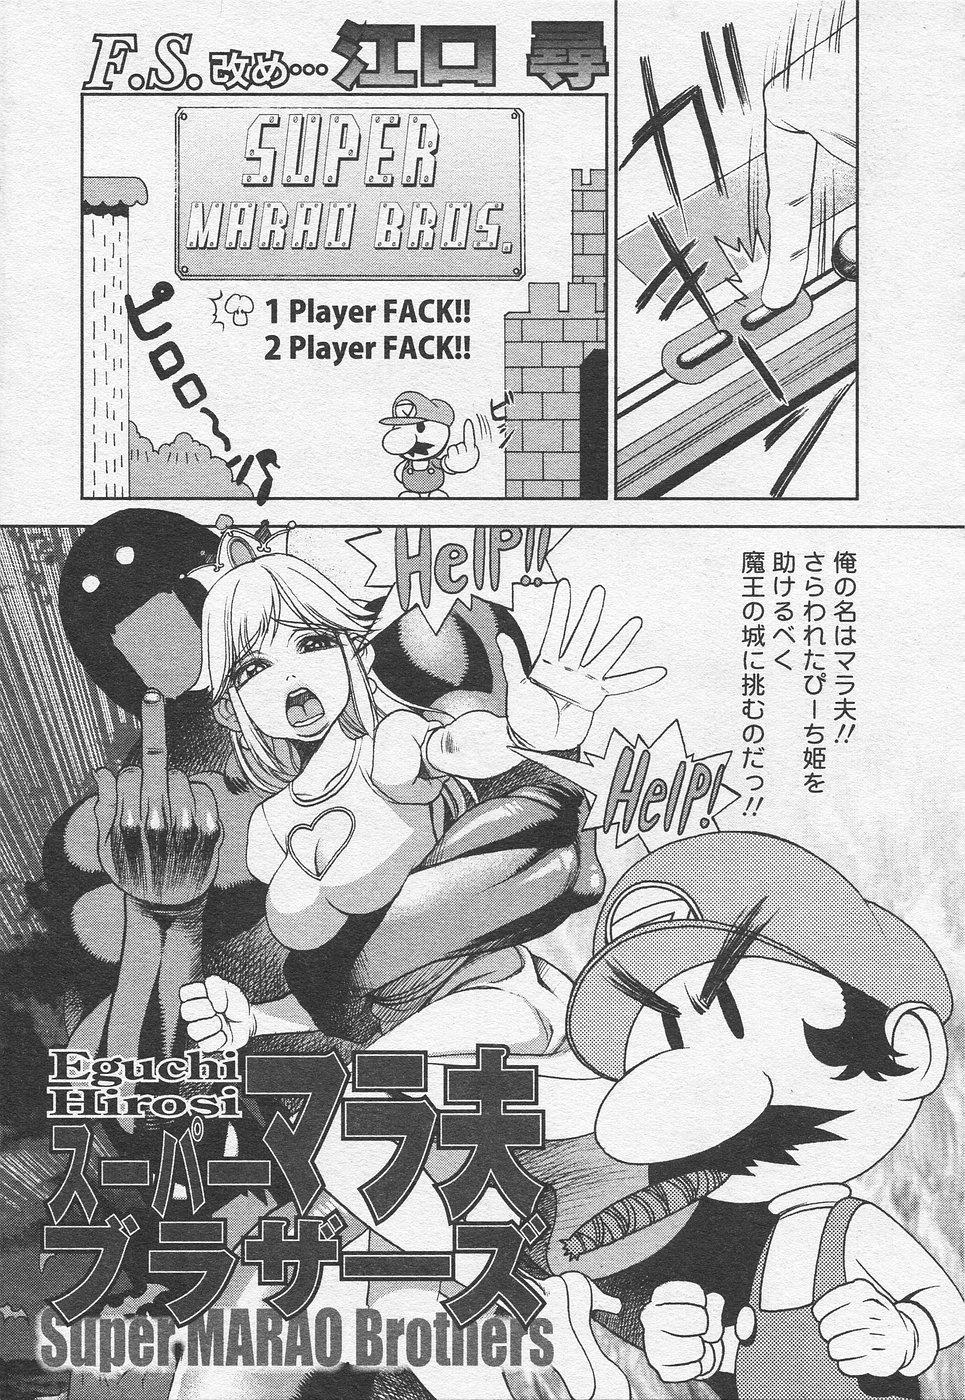 Free Rough Porn Super Marao Brothers - Super mario brothers Street Fuck - Page 1